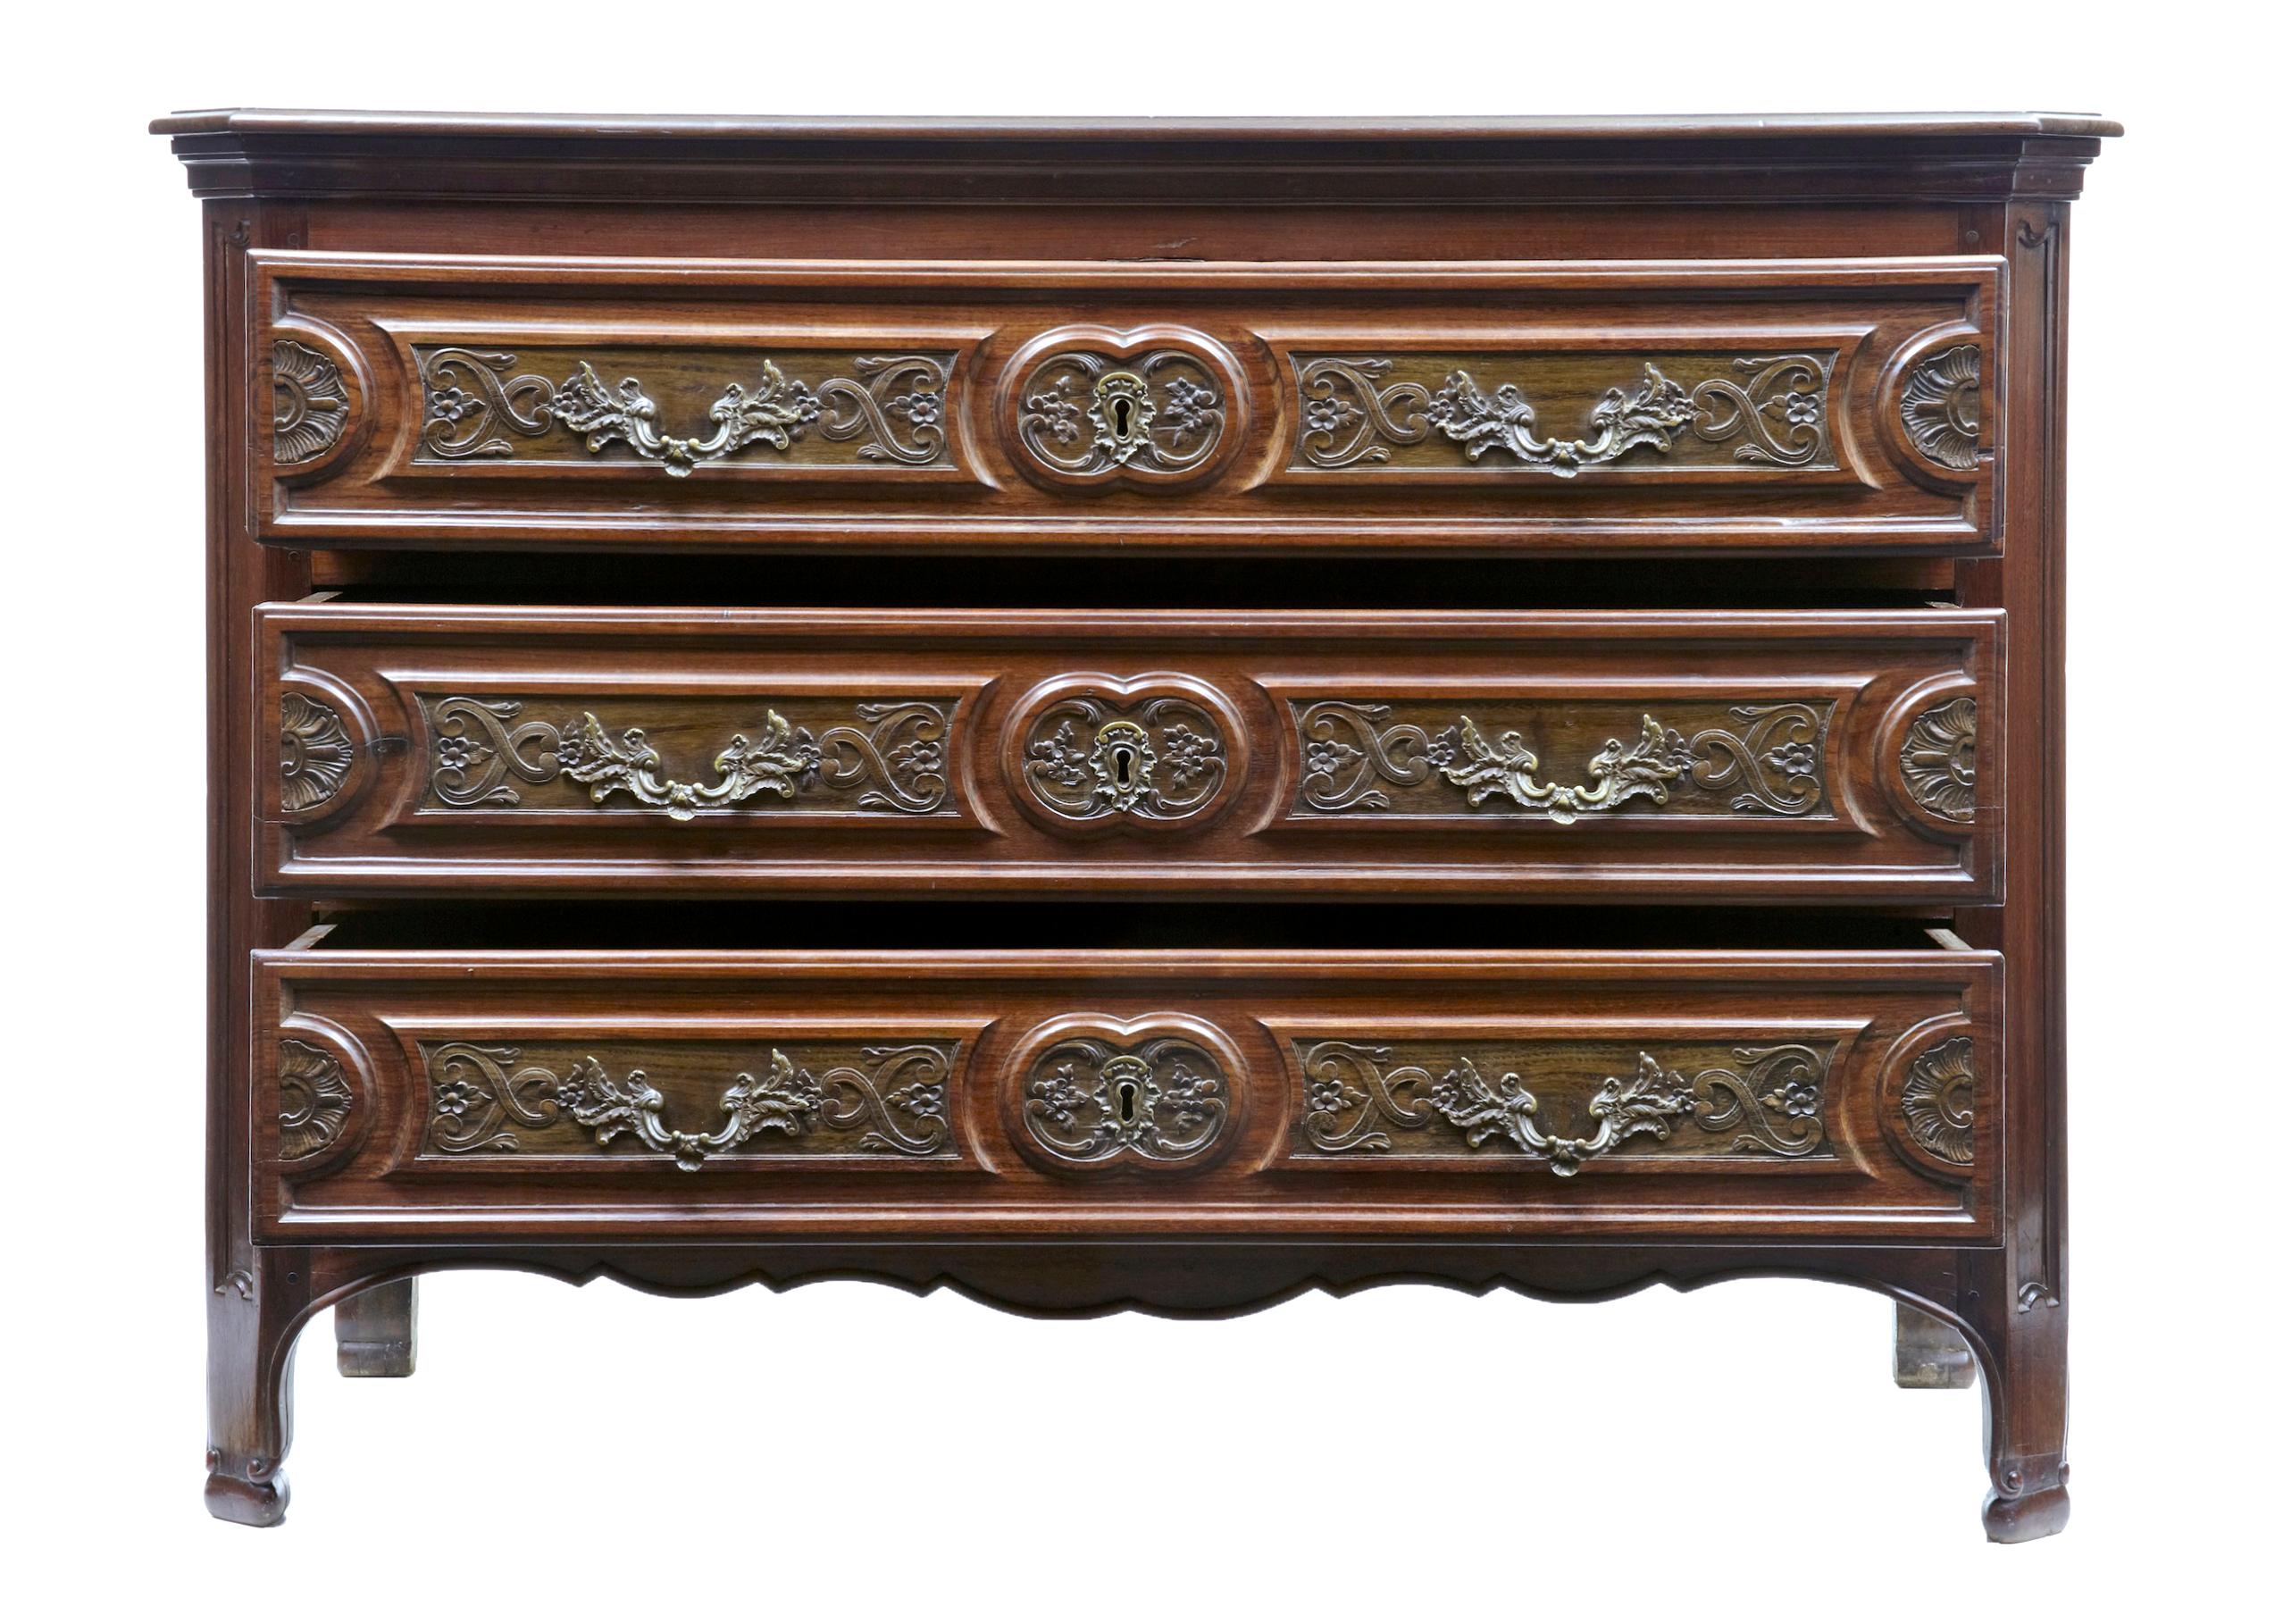 Fine 19th century antique walnut and rosewood French Provincial commode, circa 1860.

Stunning example of a mid-19th century French walnut Provincial commode. 3 drawers with profusely carved in rosewood inserts. Fitted with original ornate handles